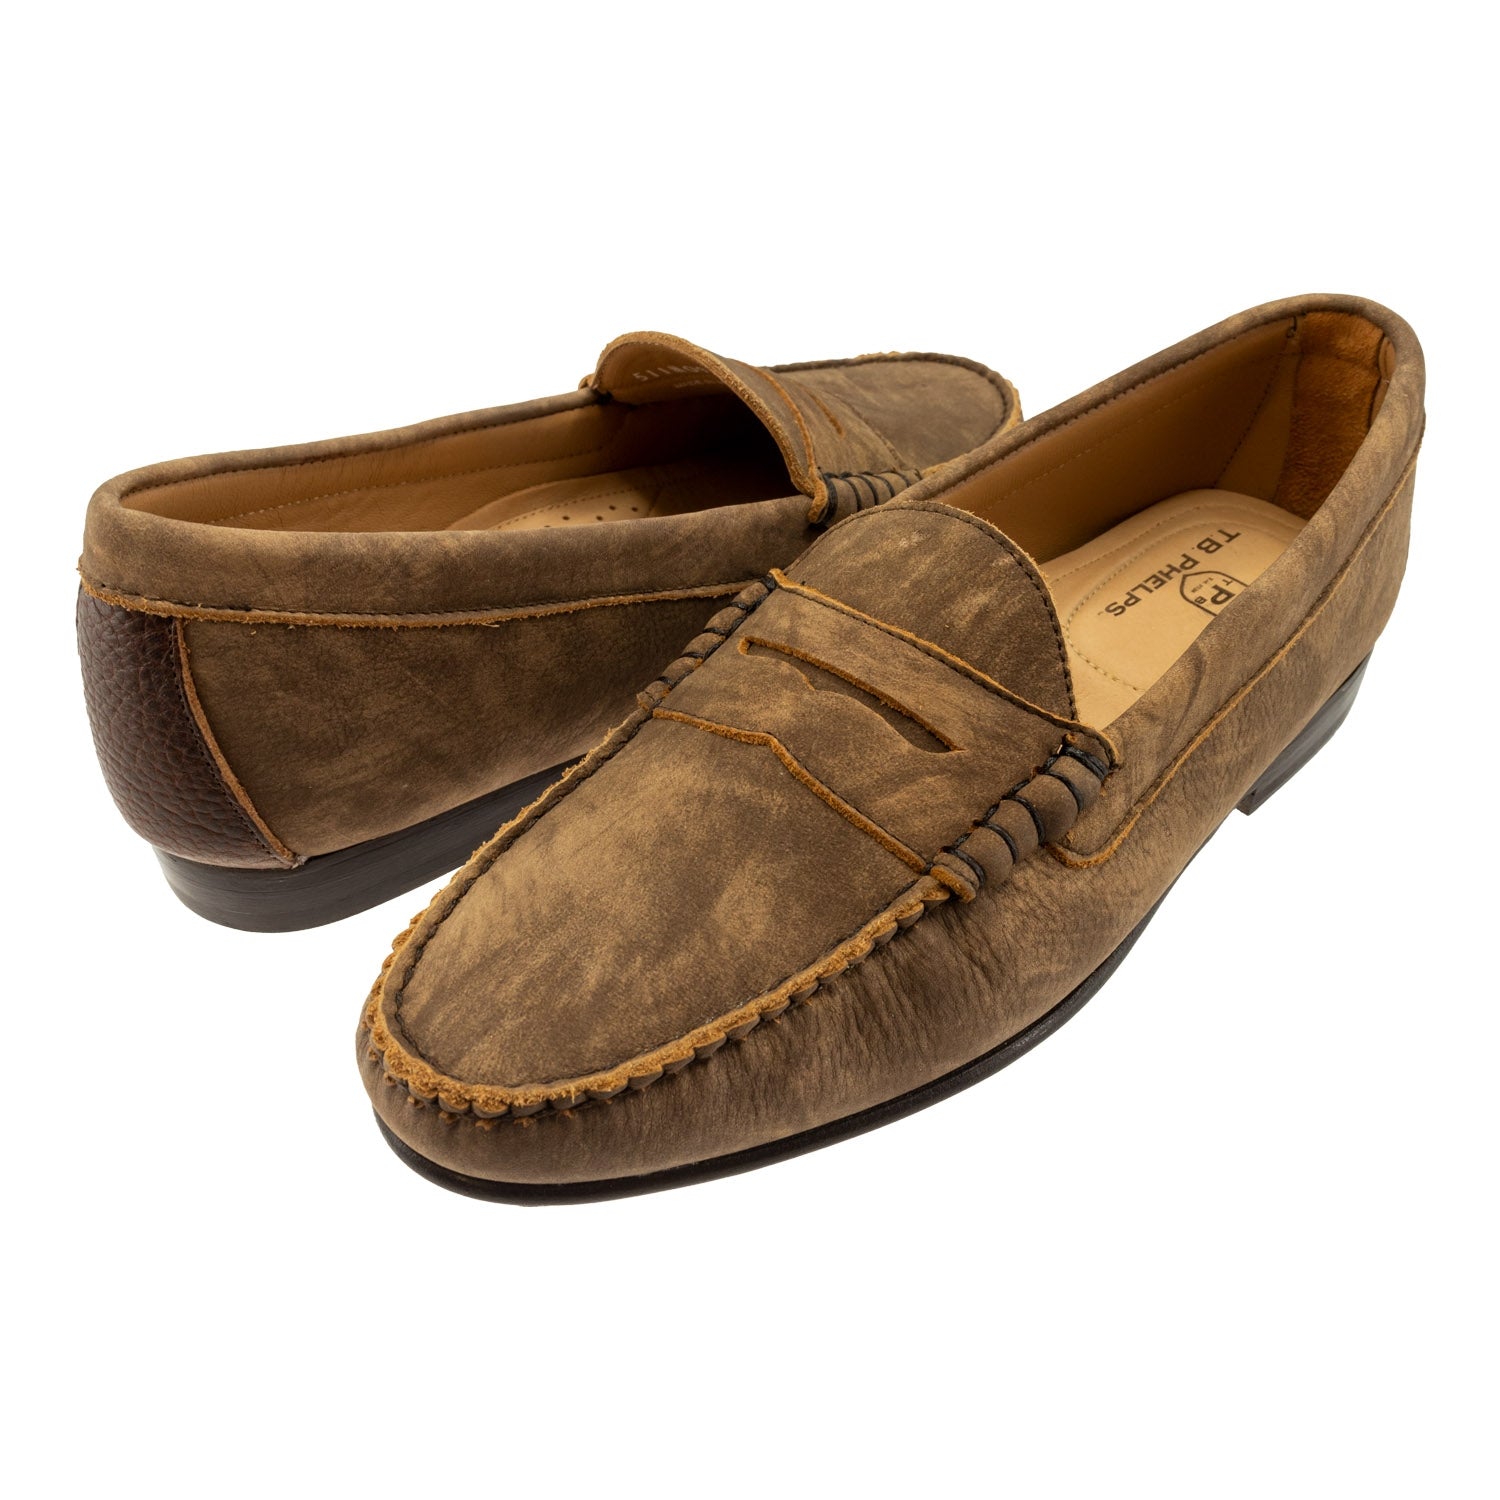 Preston Washed Calfskin Penny Loafer in Briar by T.B. Phelps